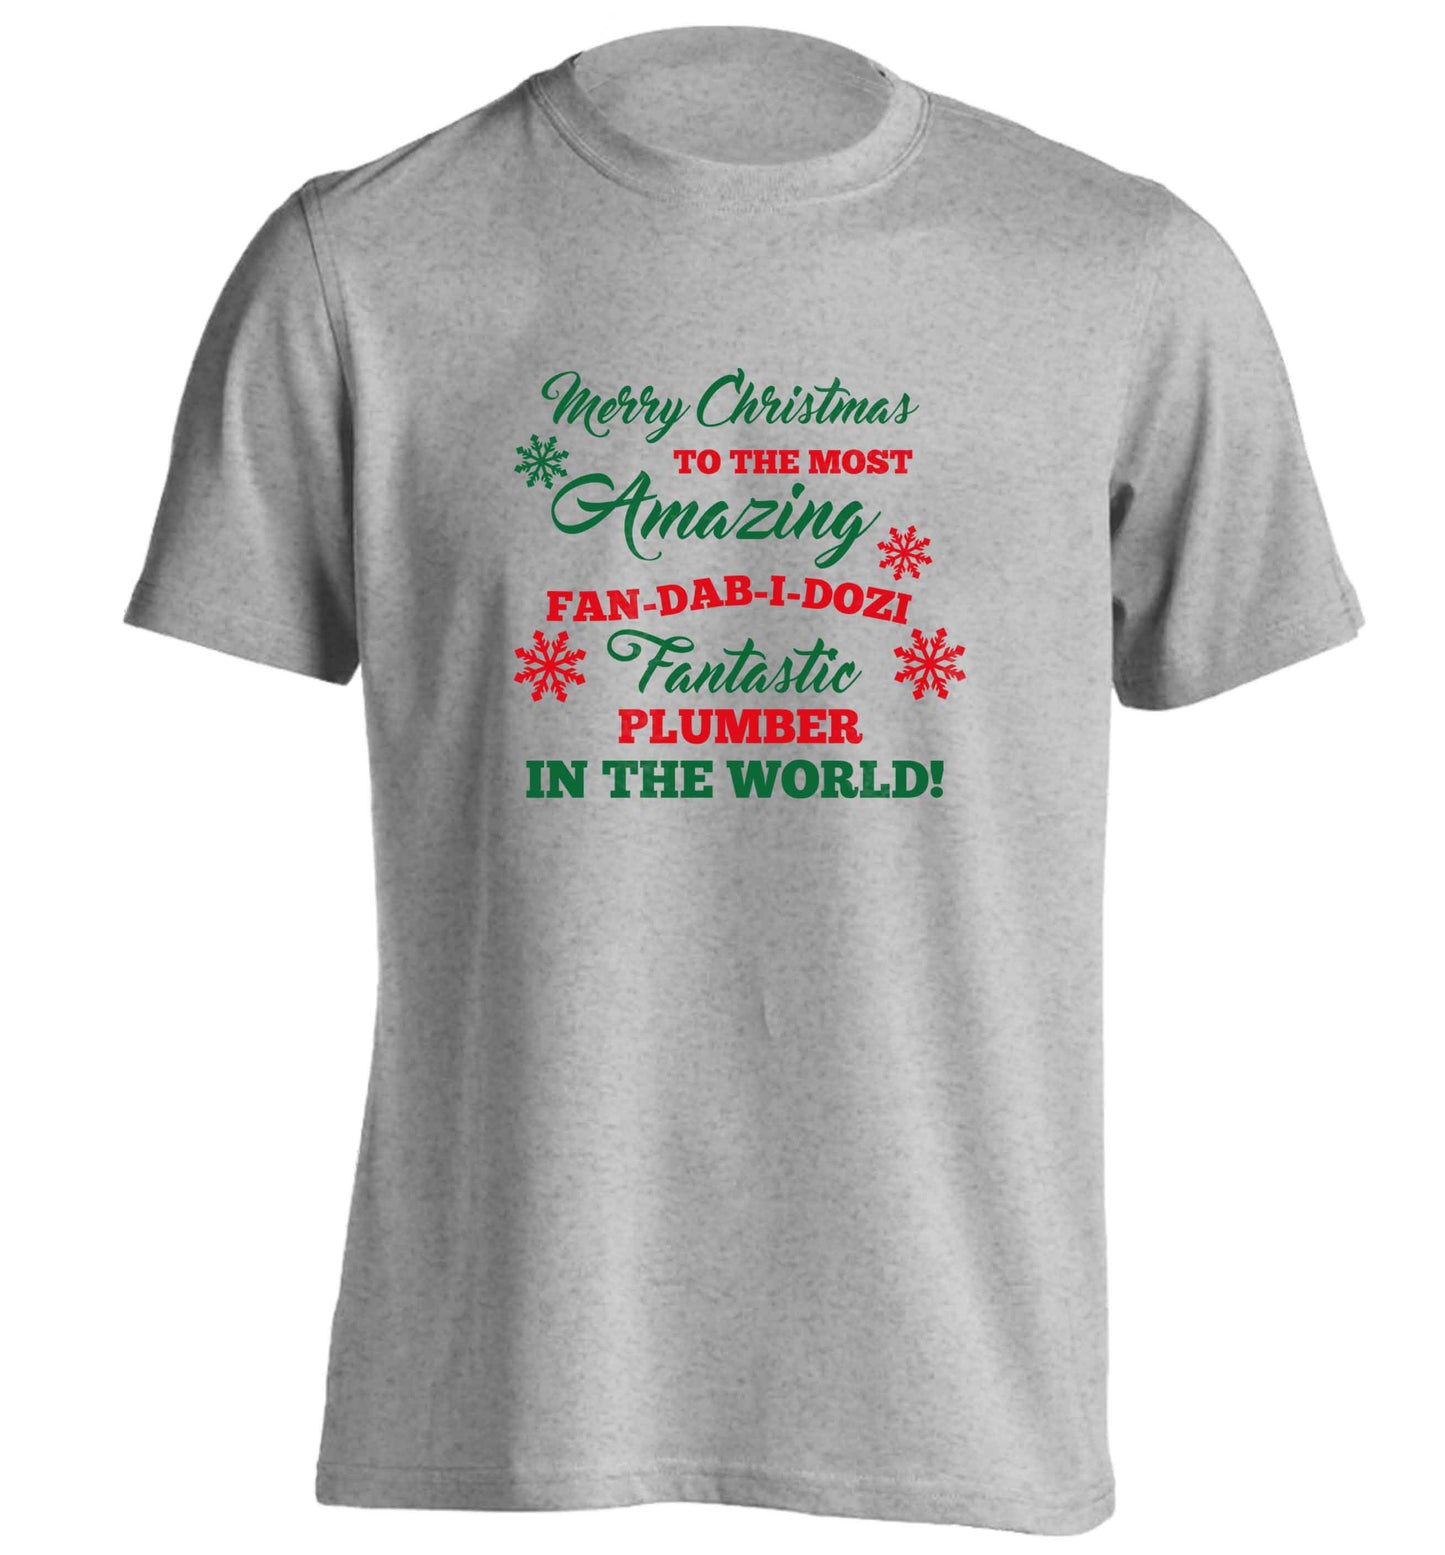 Merry Christmas to the most amazing plumber in the world! adults unisex grey Tshirt 2XL